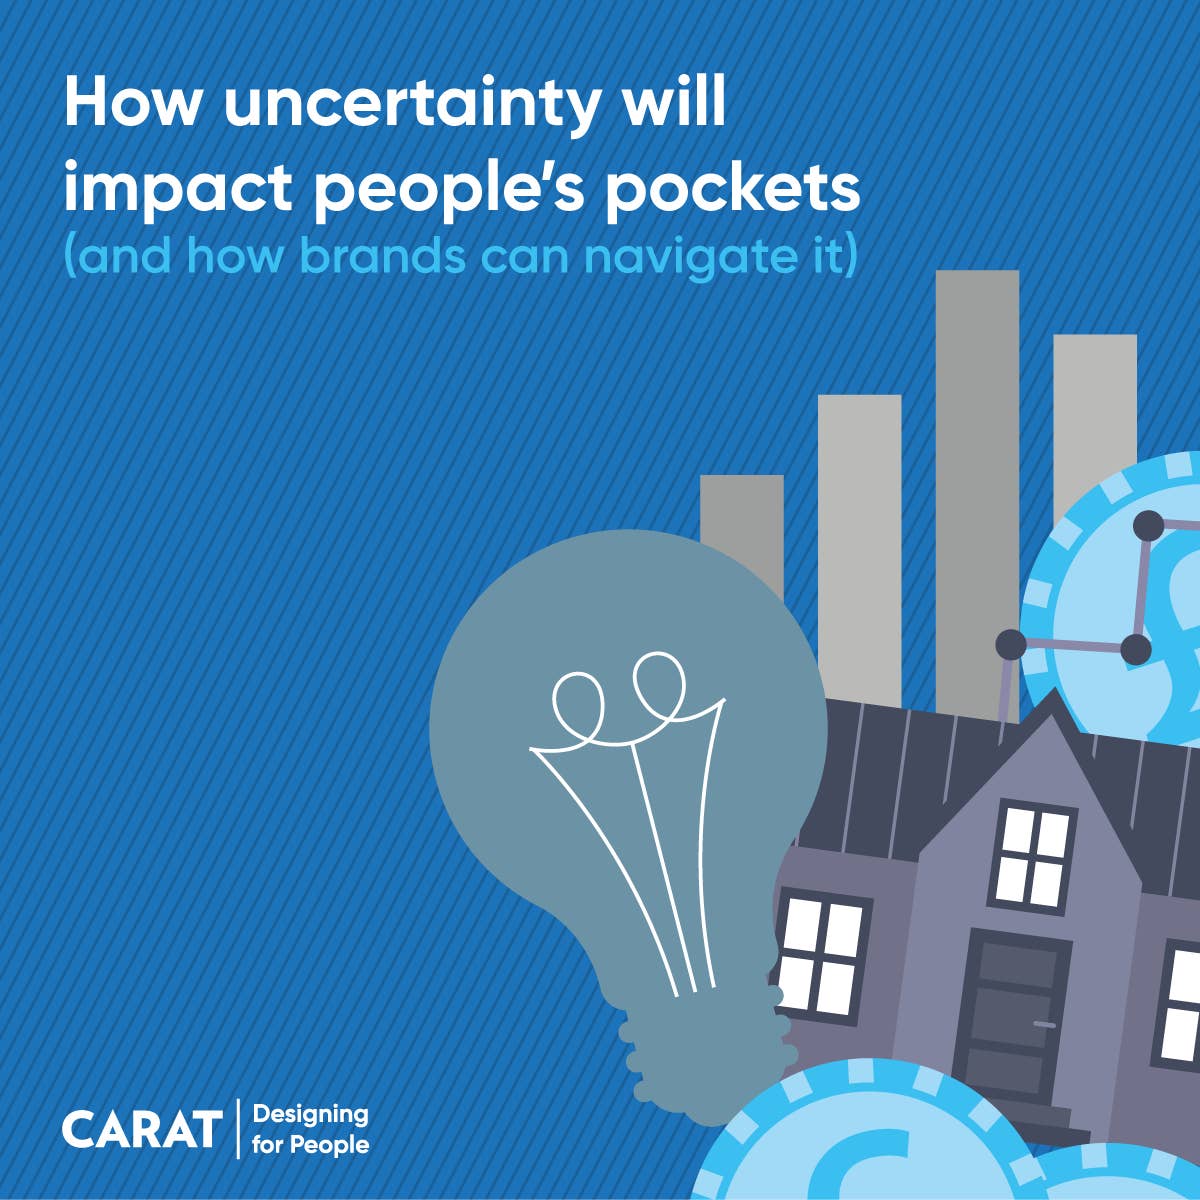 How uncertainty will impact people's pockets (and how brands can navigate it)